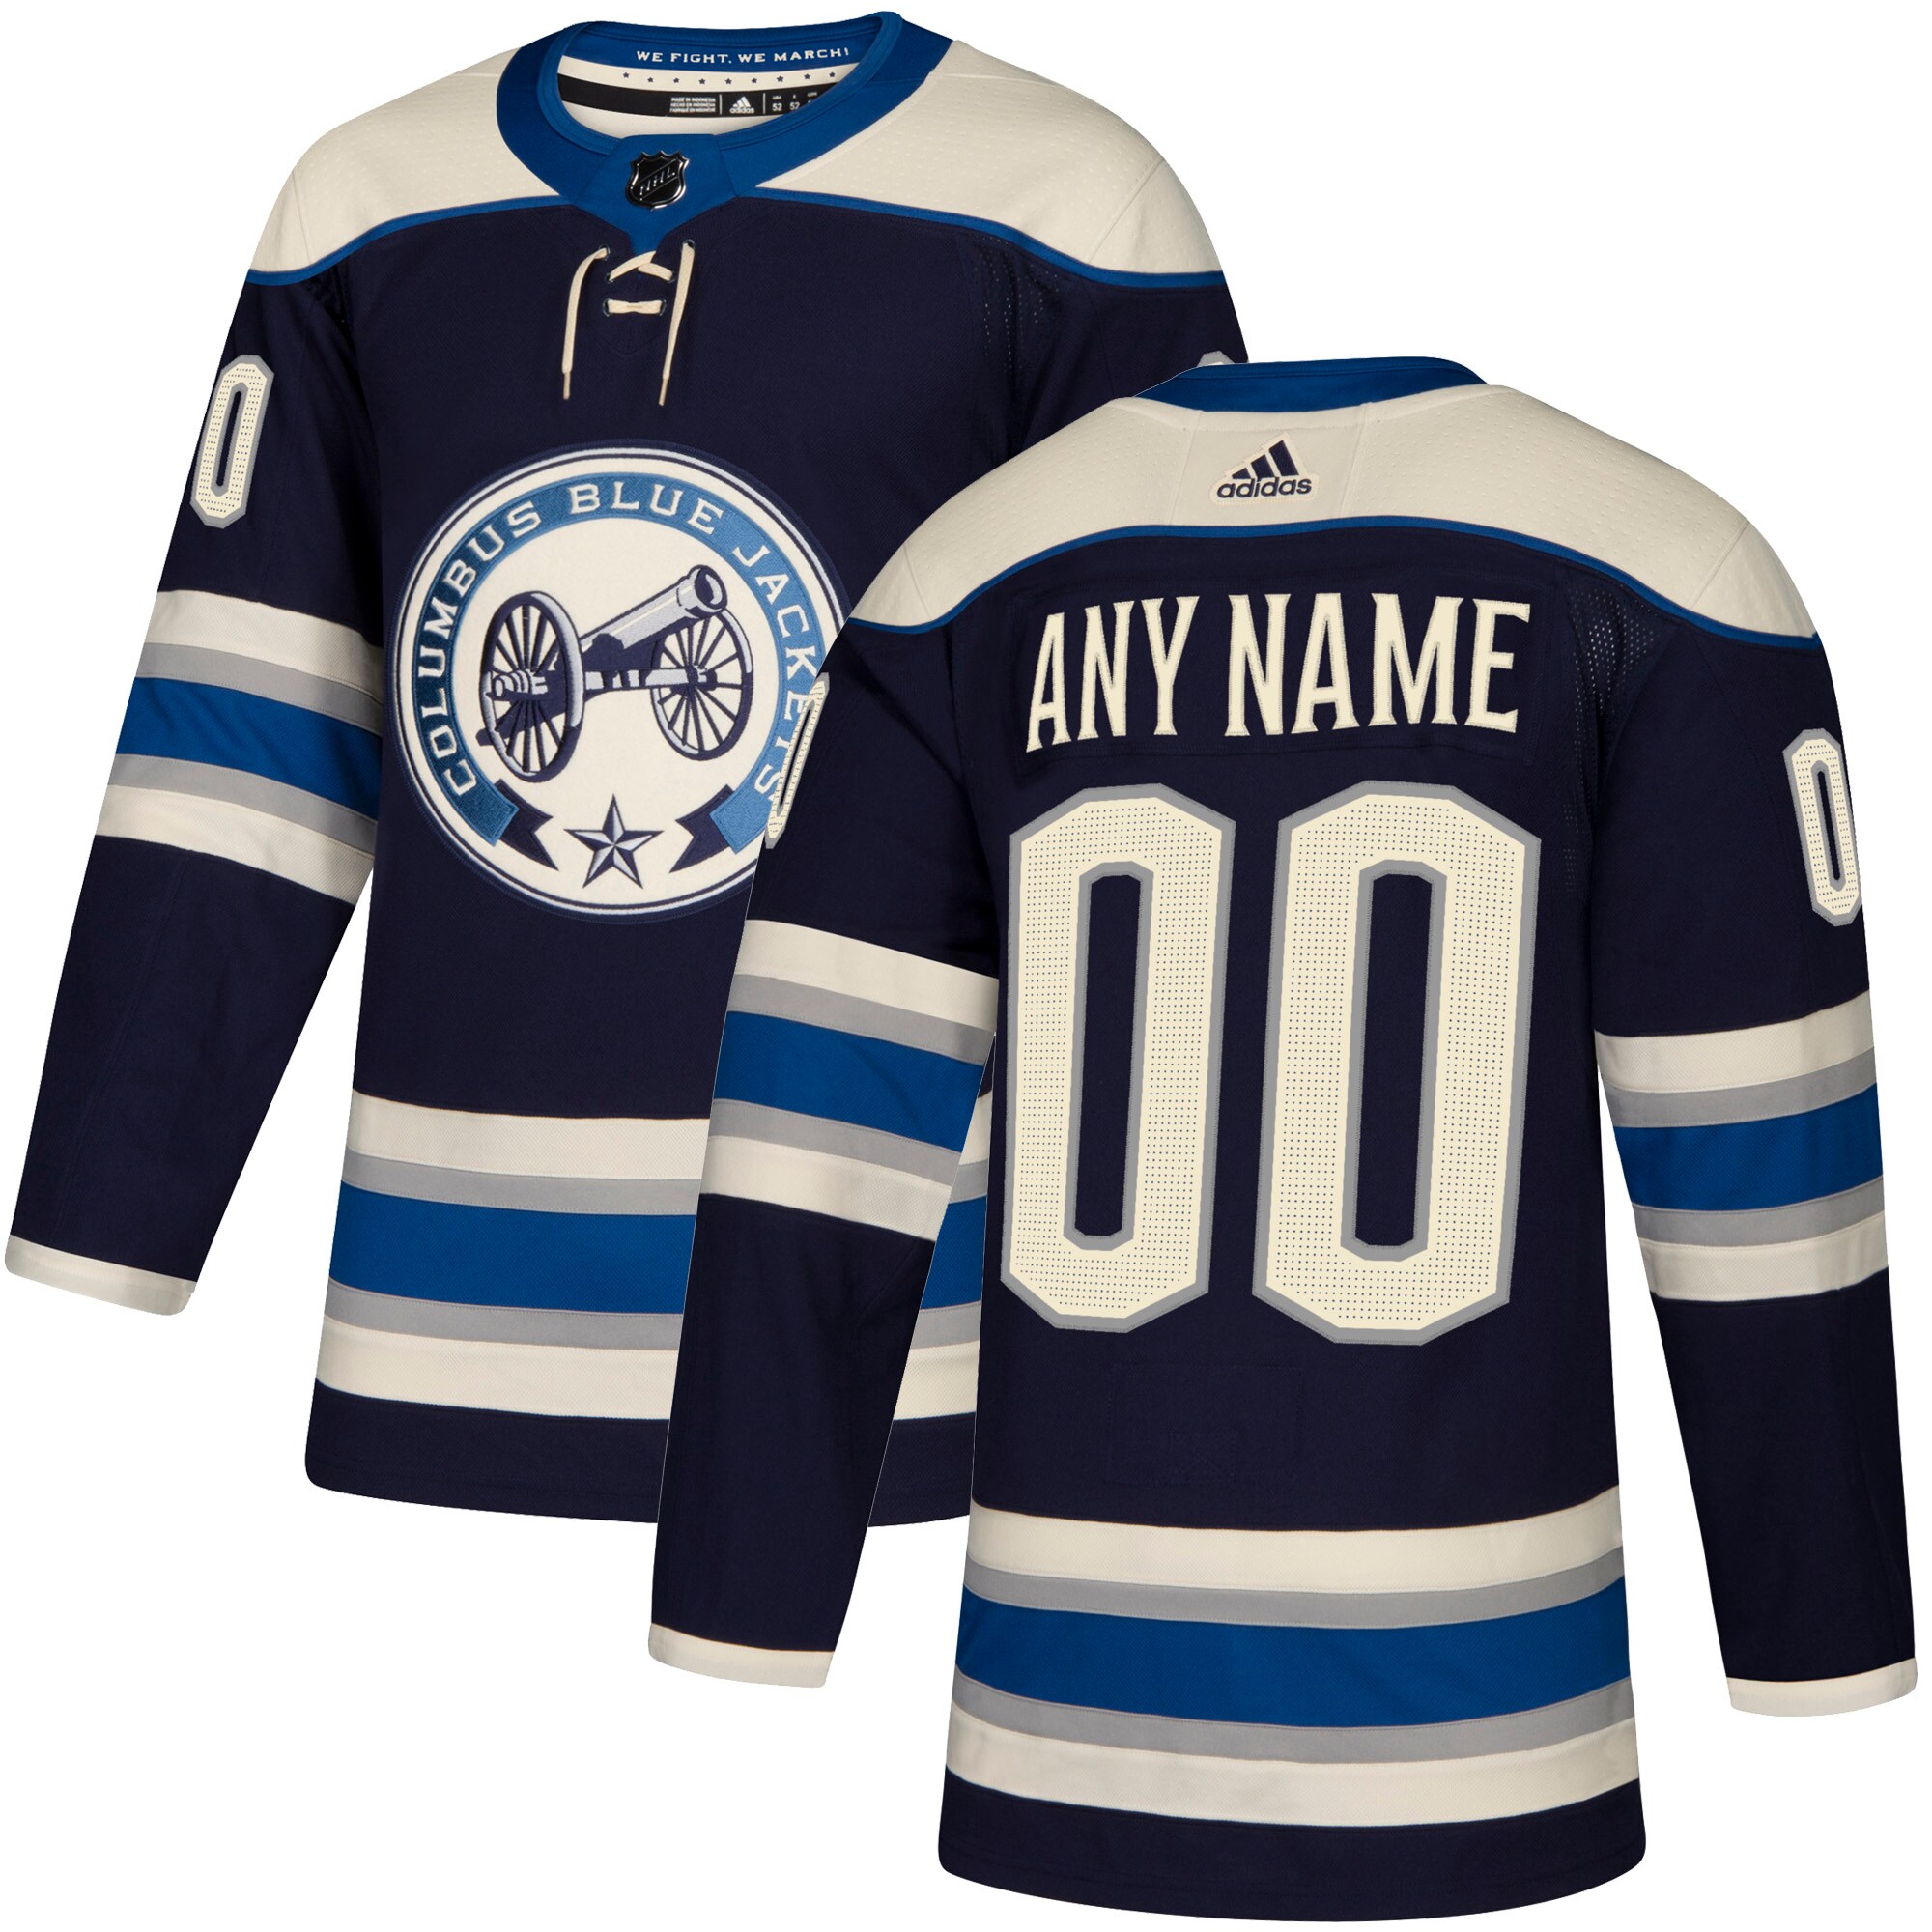 NHL home jersey rankings: The best and worst looks for 2019-20